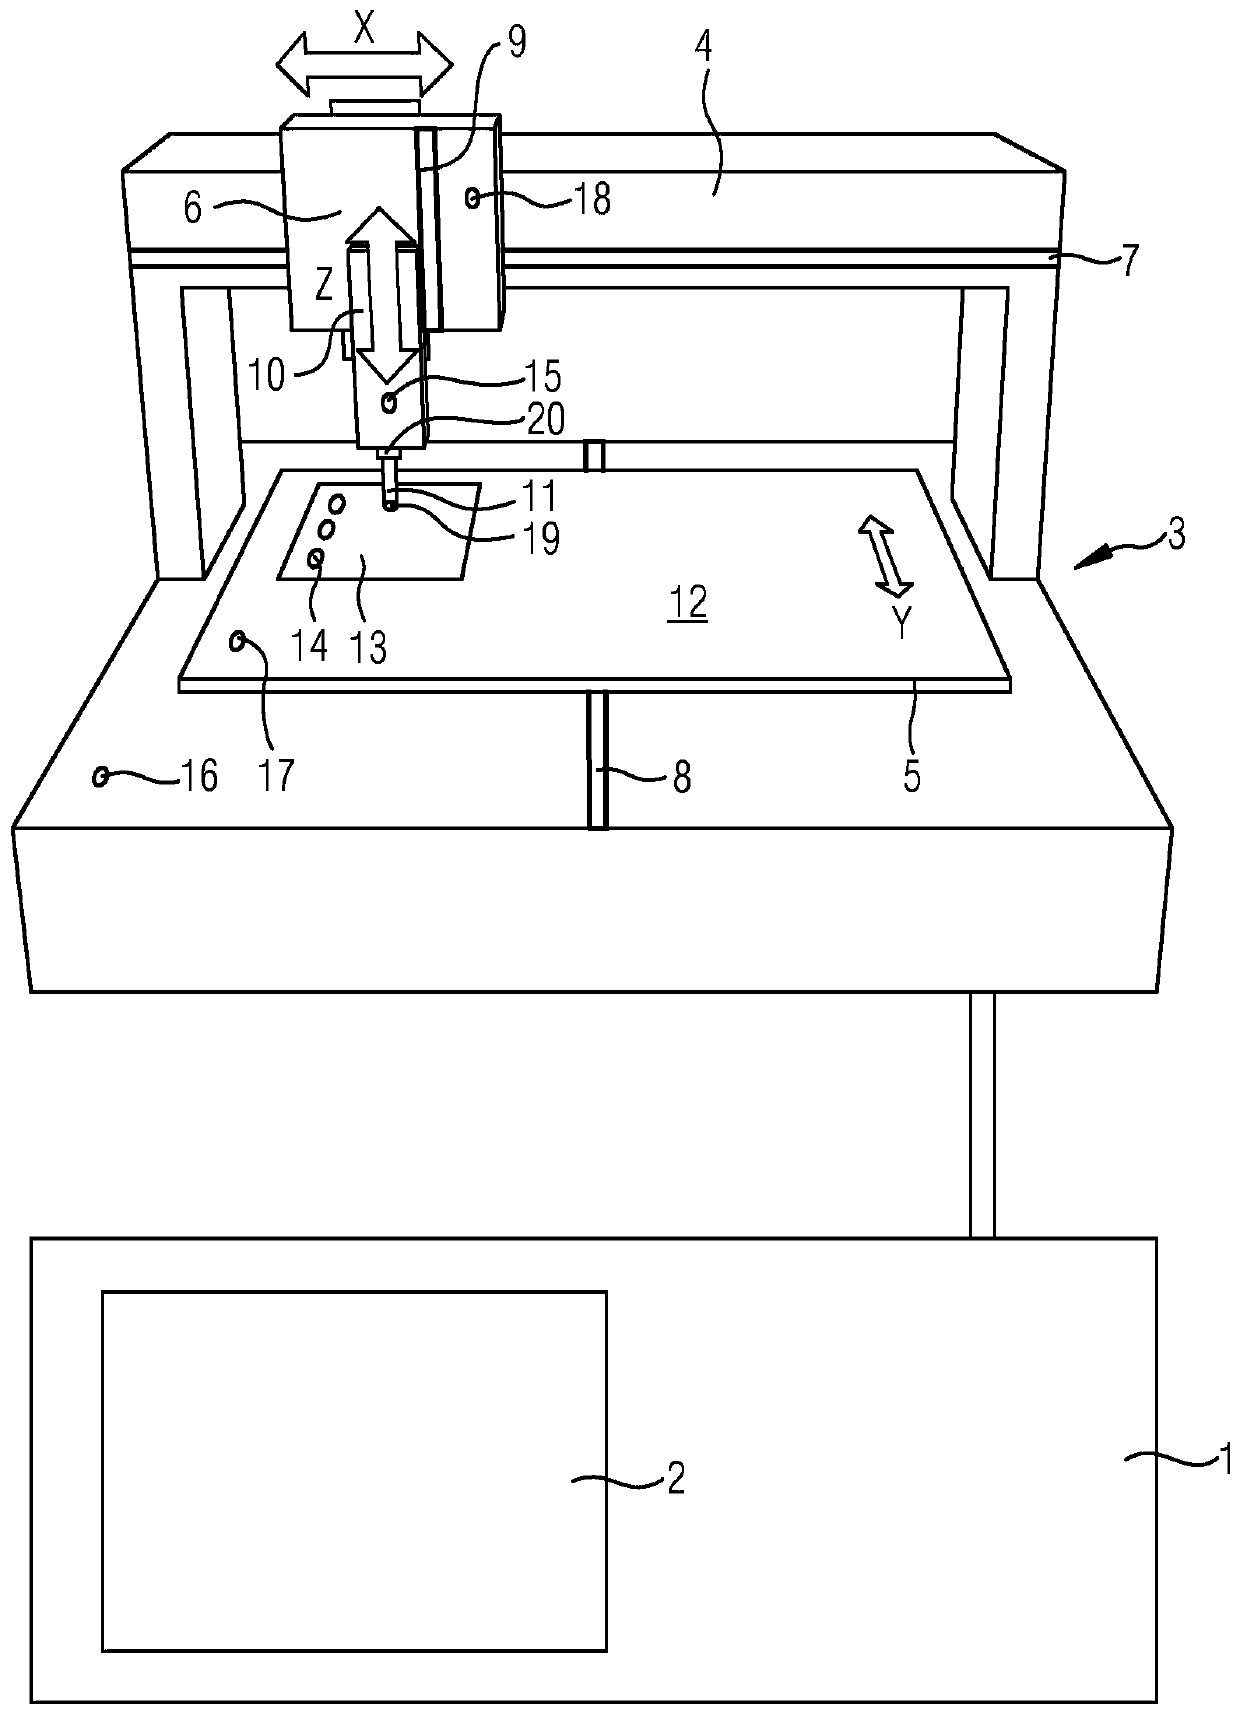 Method for determining positional errors of drilled holes and securing the drilling process